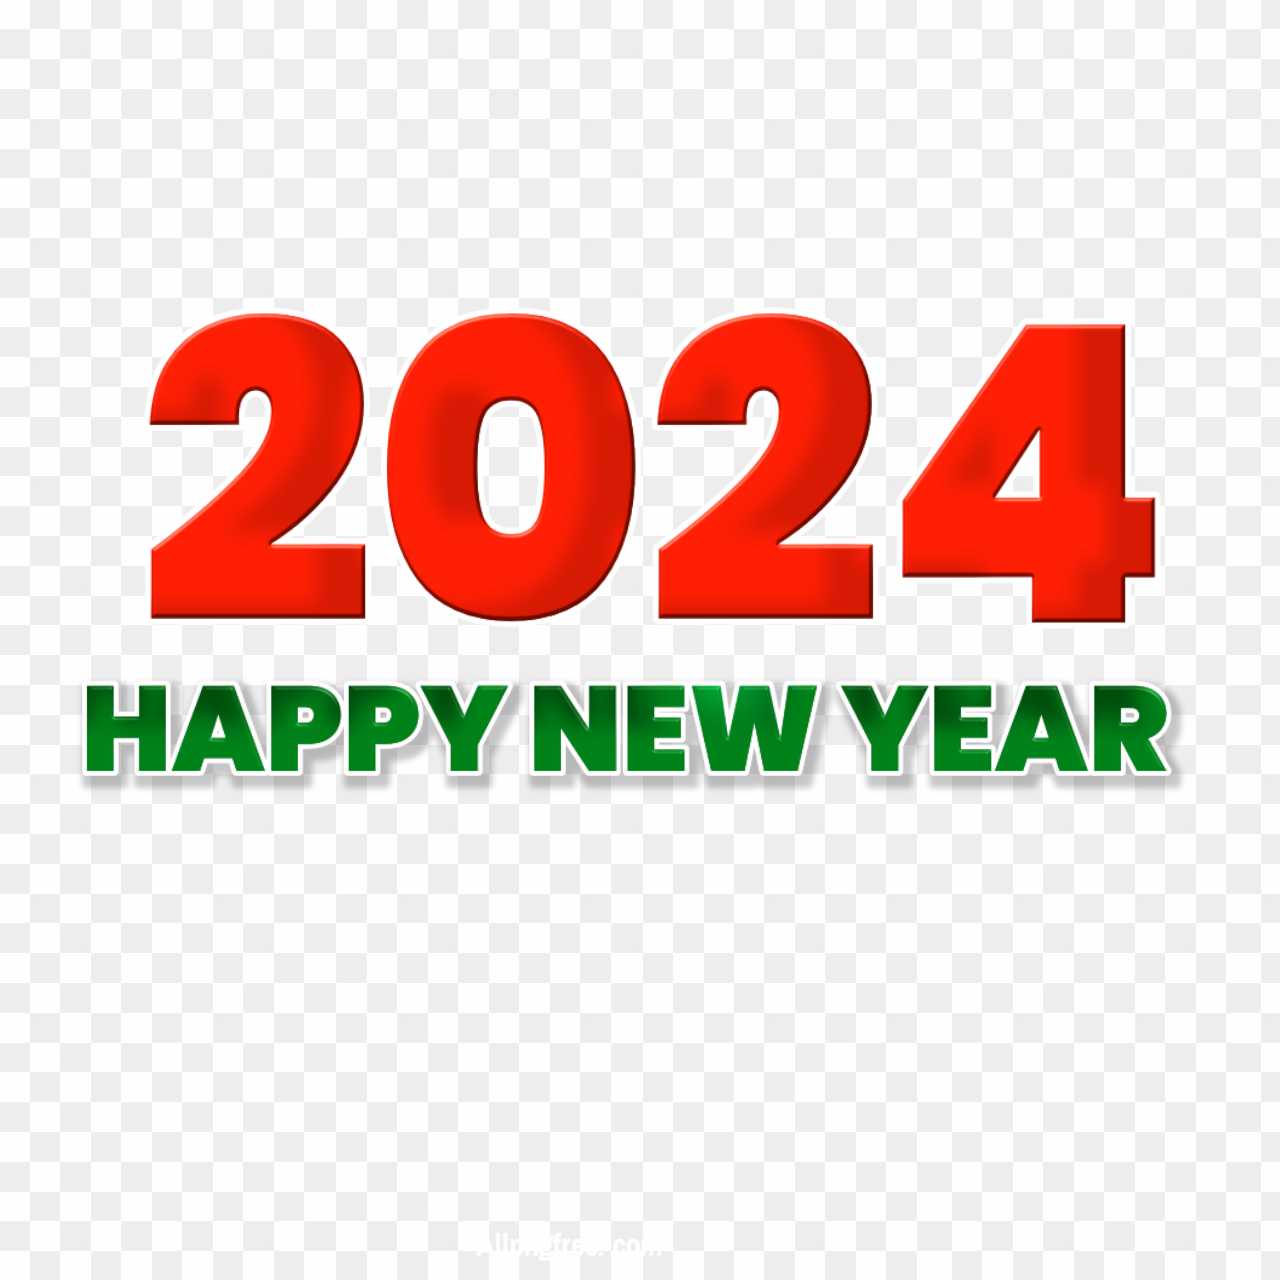 New Year 2024 PNG images download 